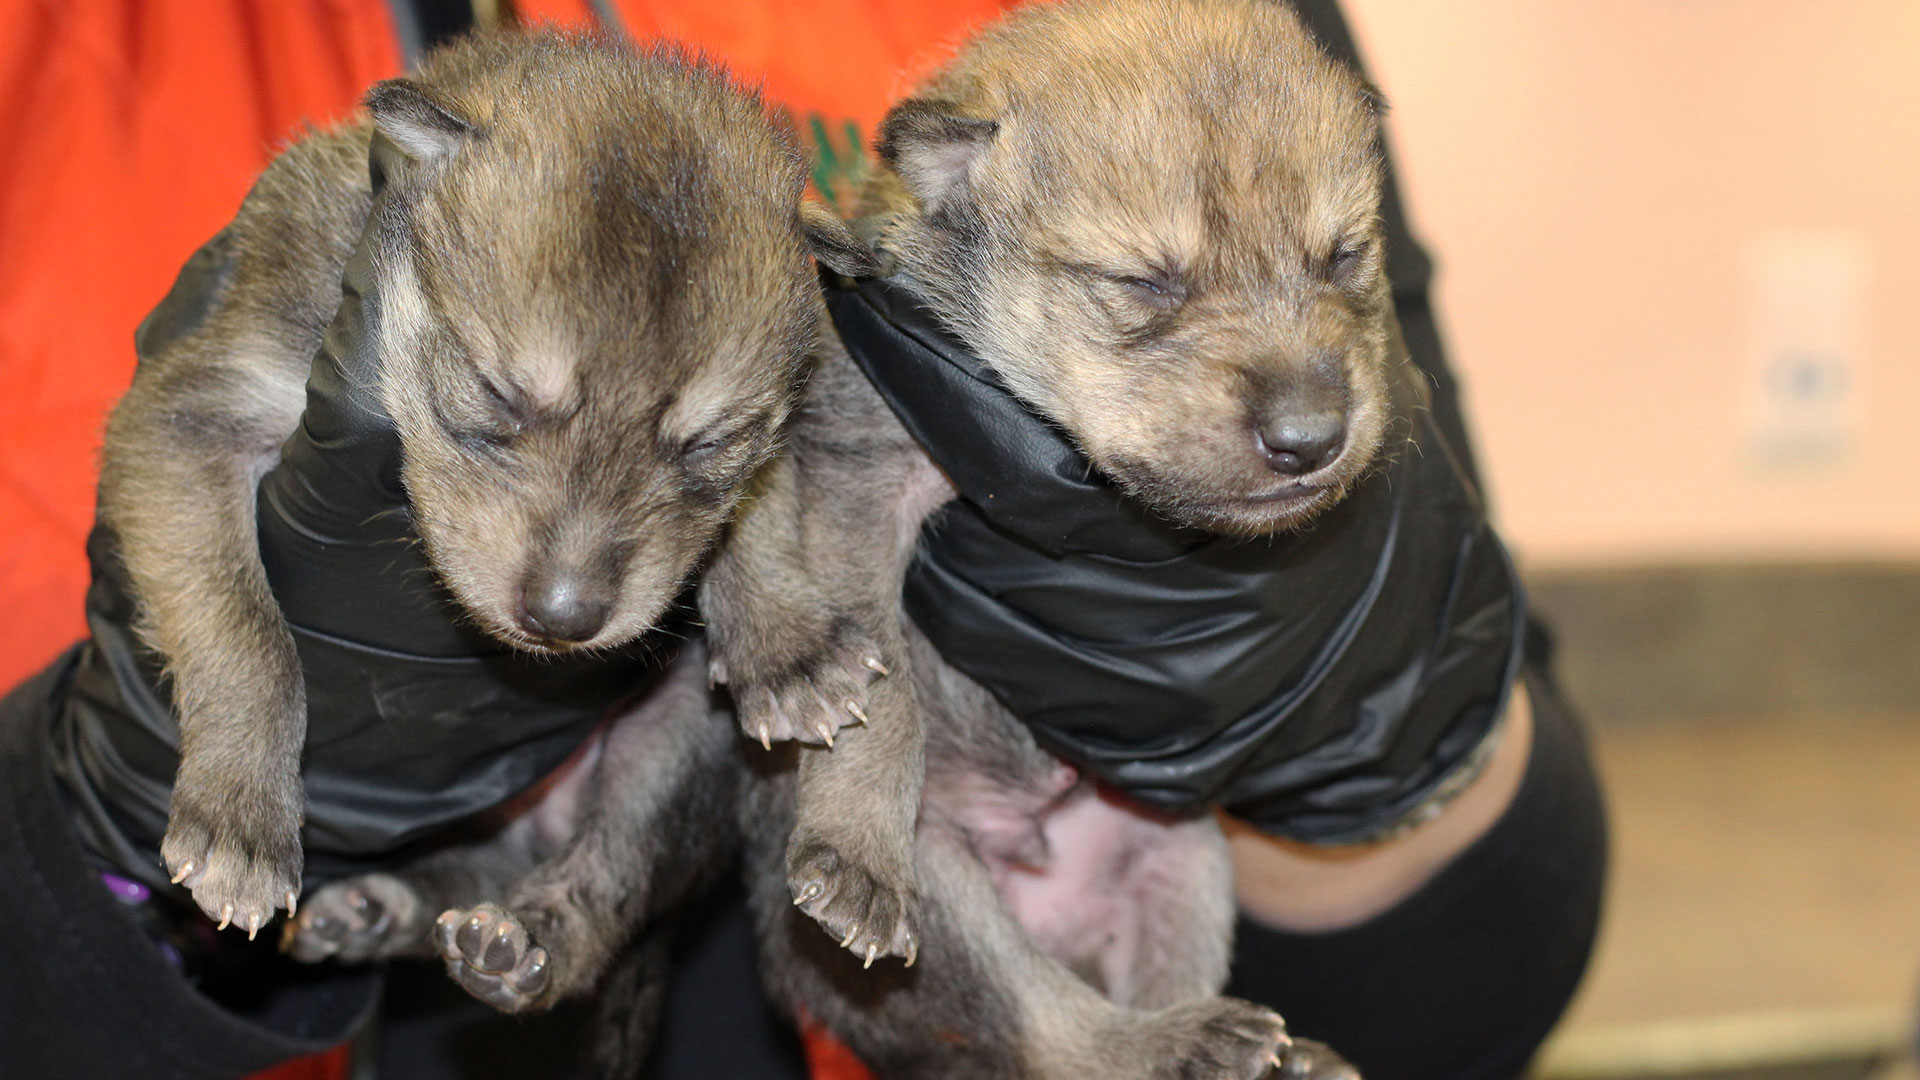 These two Mexican gray wolf pups and siblings were born at the Wolf Conservation Center in New York. They are considered "neonatal" and less than 14 days old. 